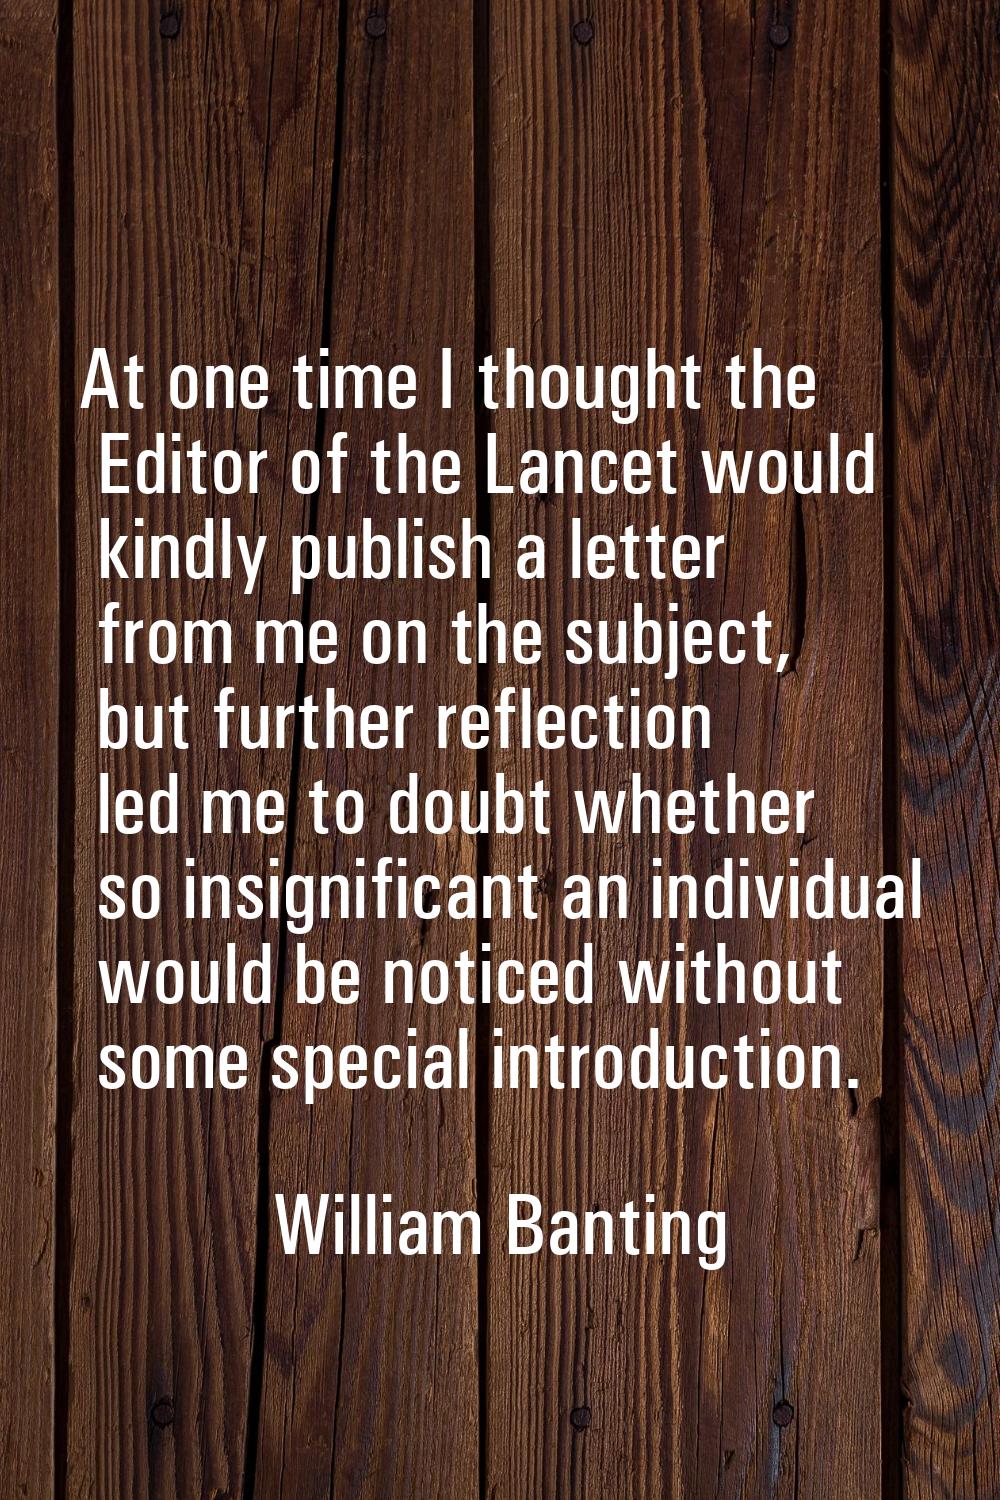 At one time I thought the Editor of the Lancet would kindly publish a letter from me on the subject